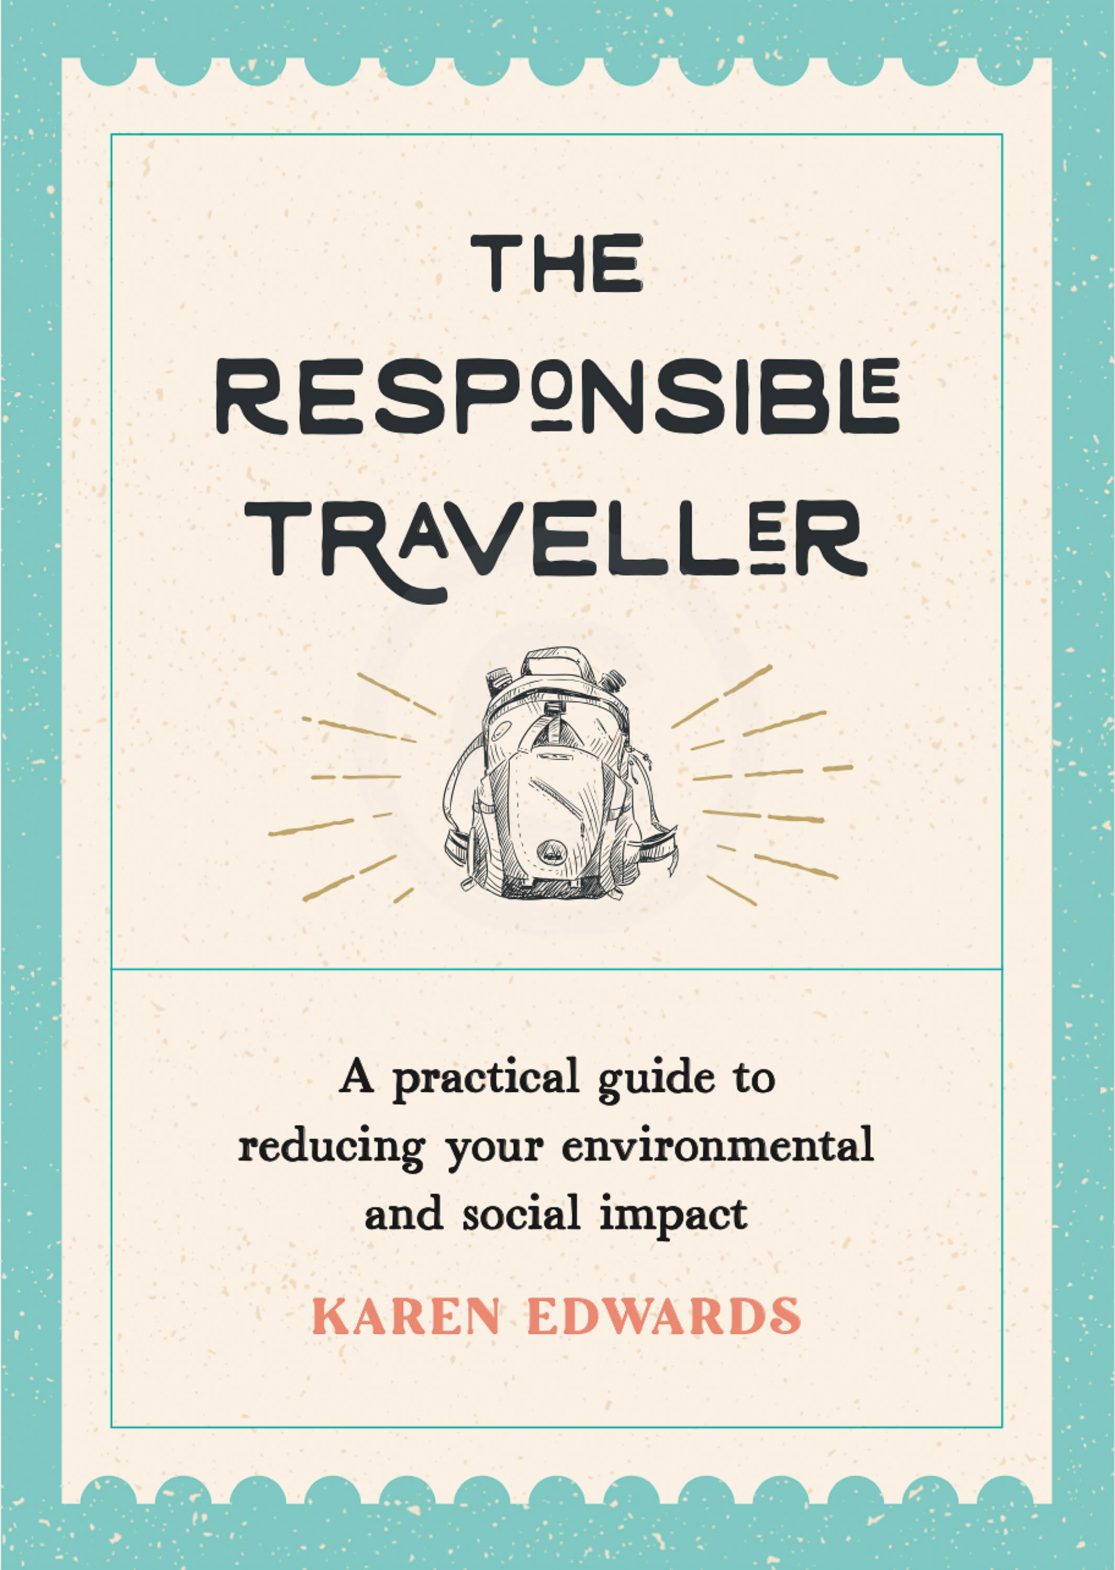 The cover of the book 'The Responsible Traveler'.